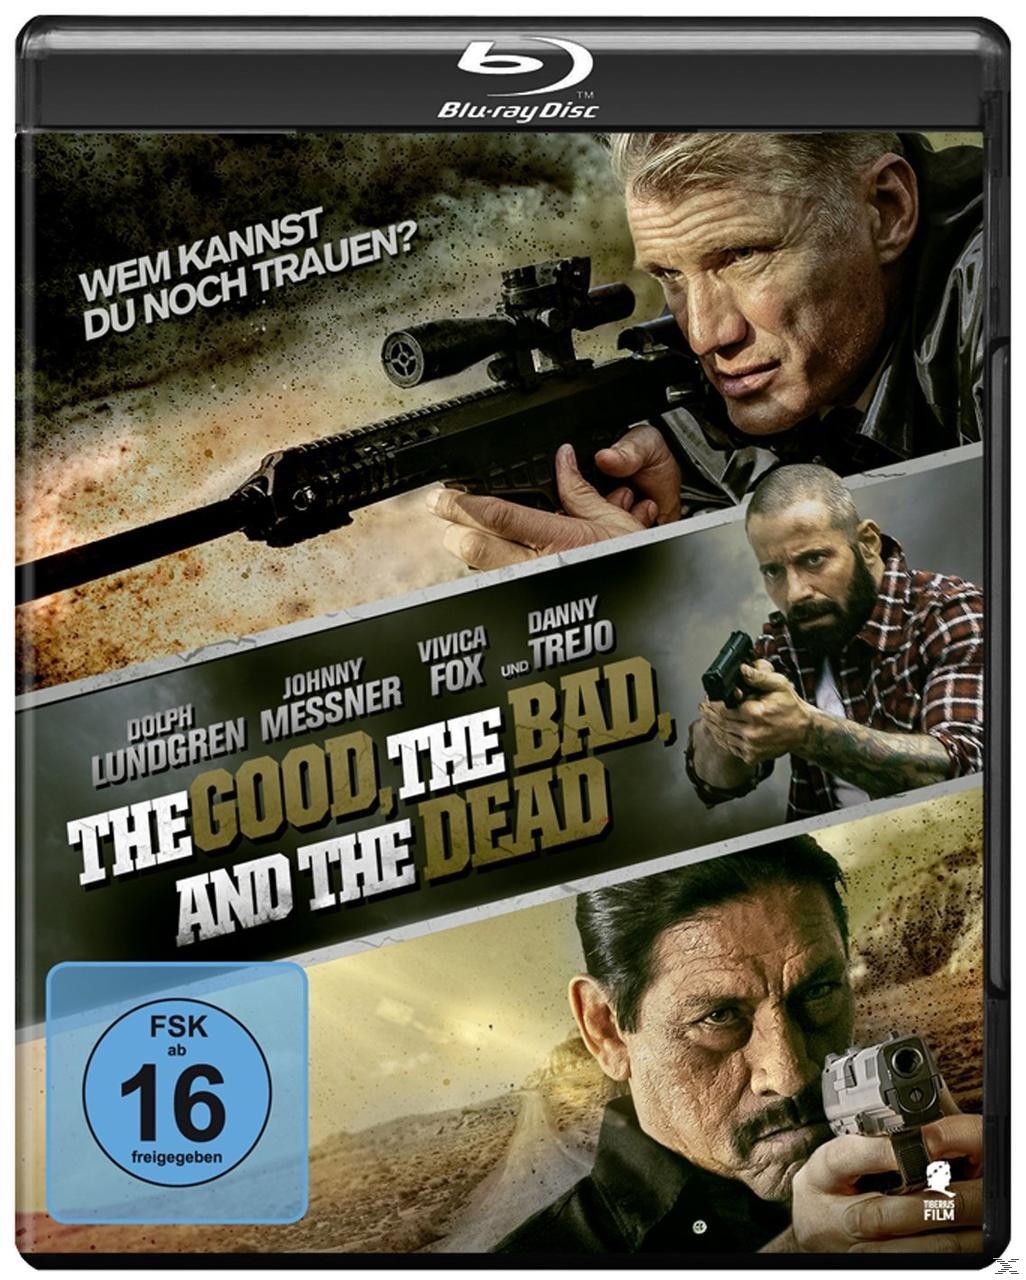 The The Dead Good, Bad Blu-ray And The